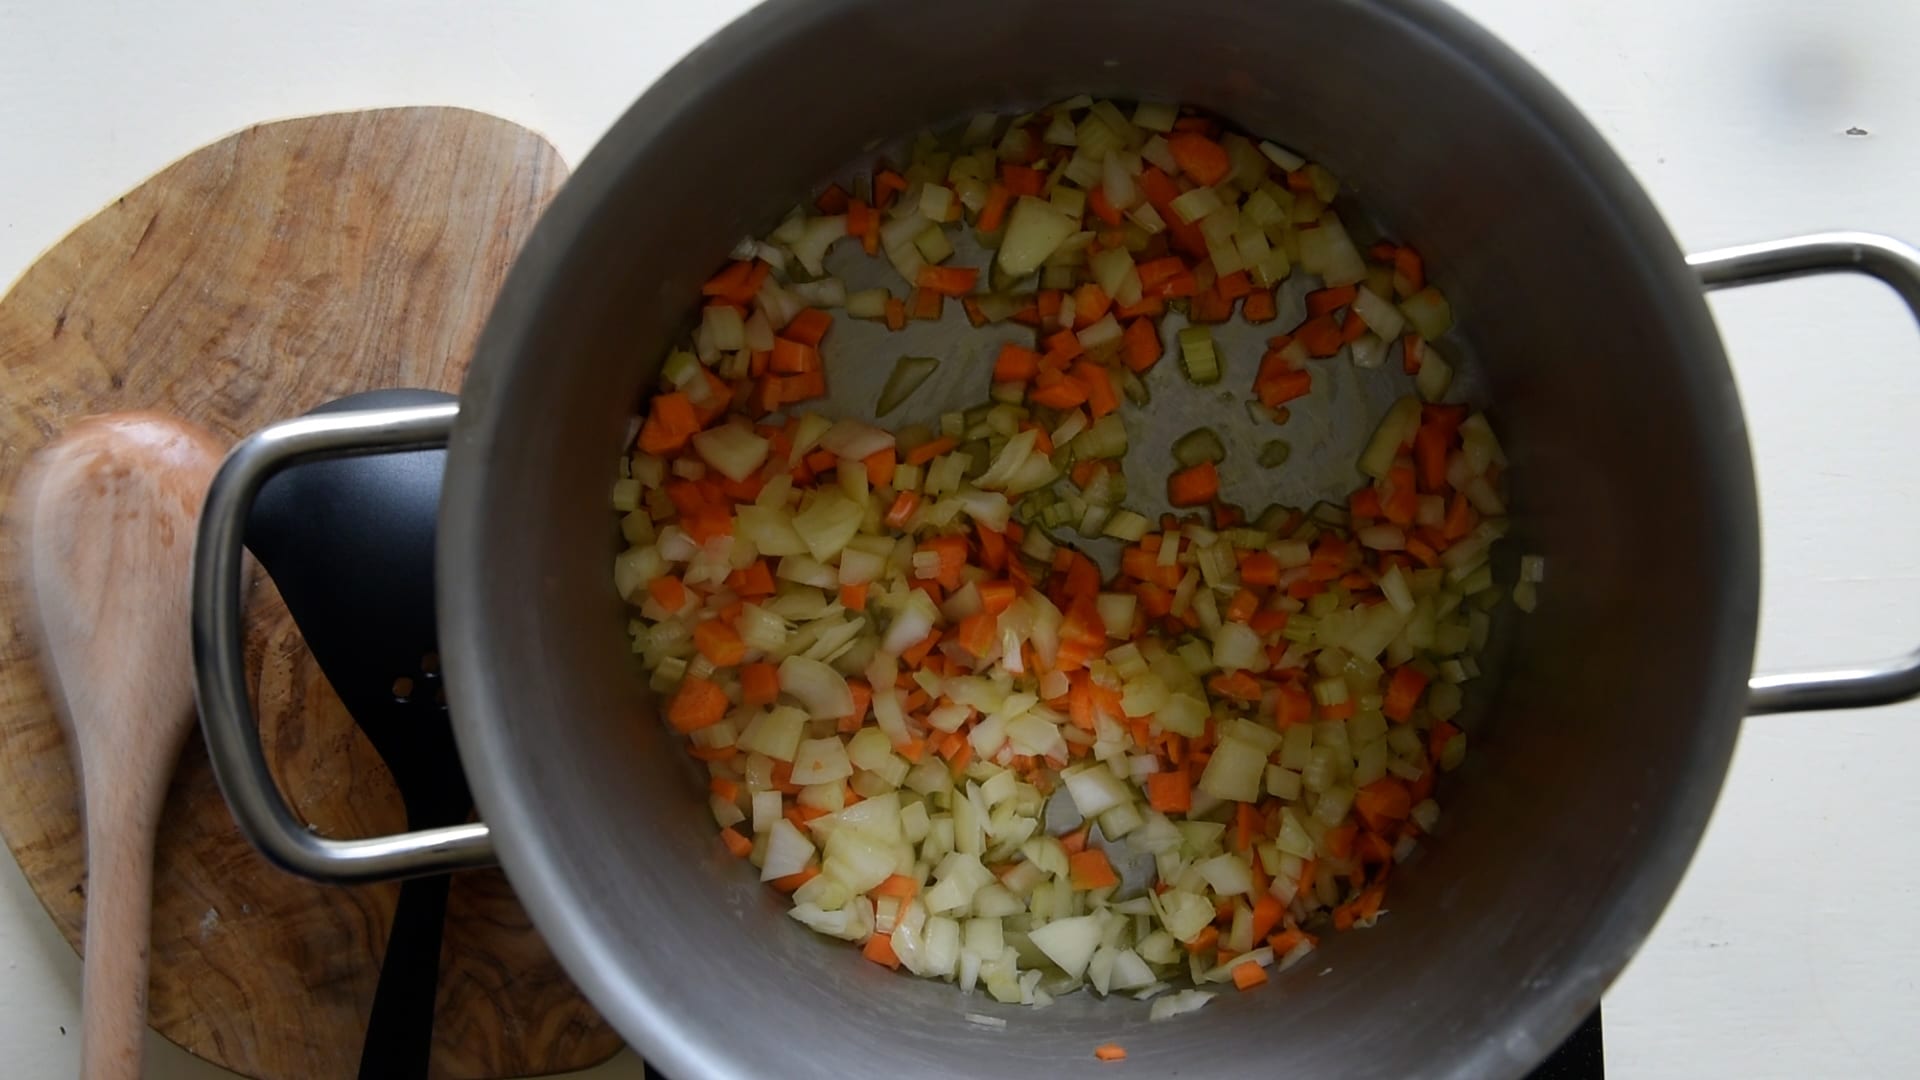 Add diced carrot, celery and onion and stir fry to make a soffritto